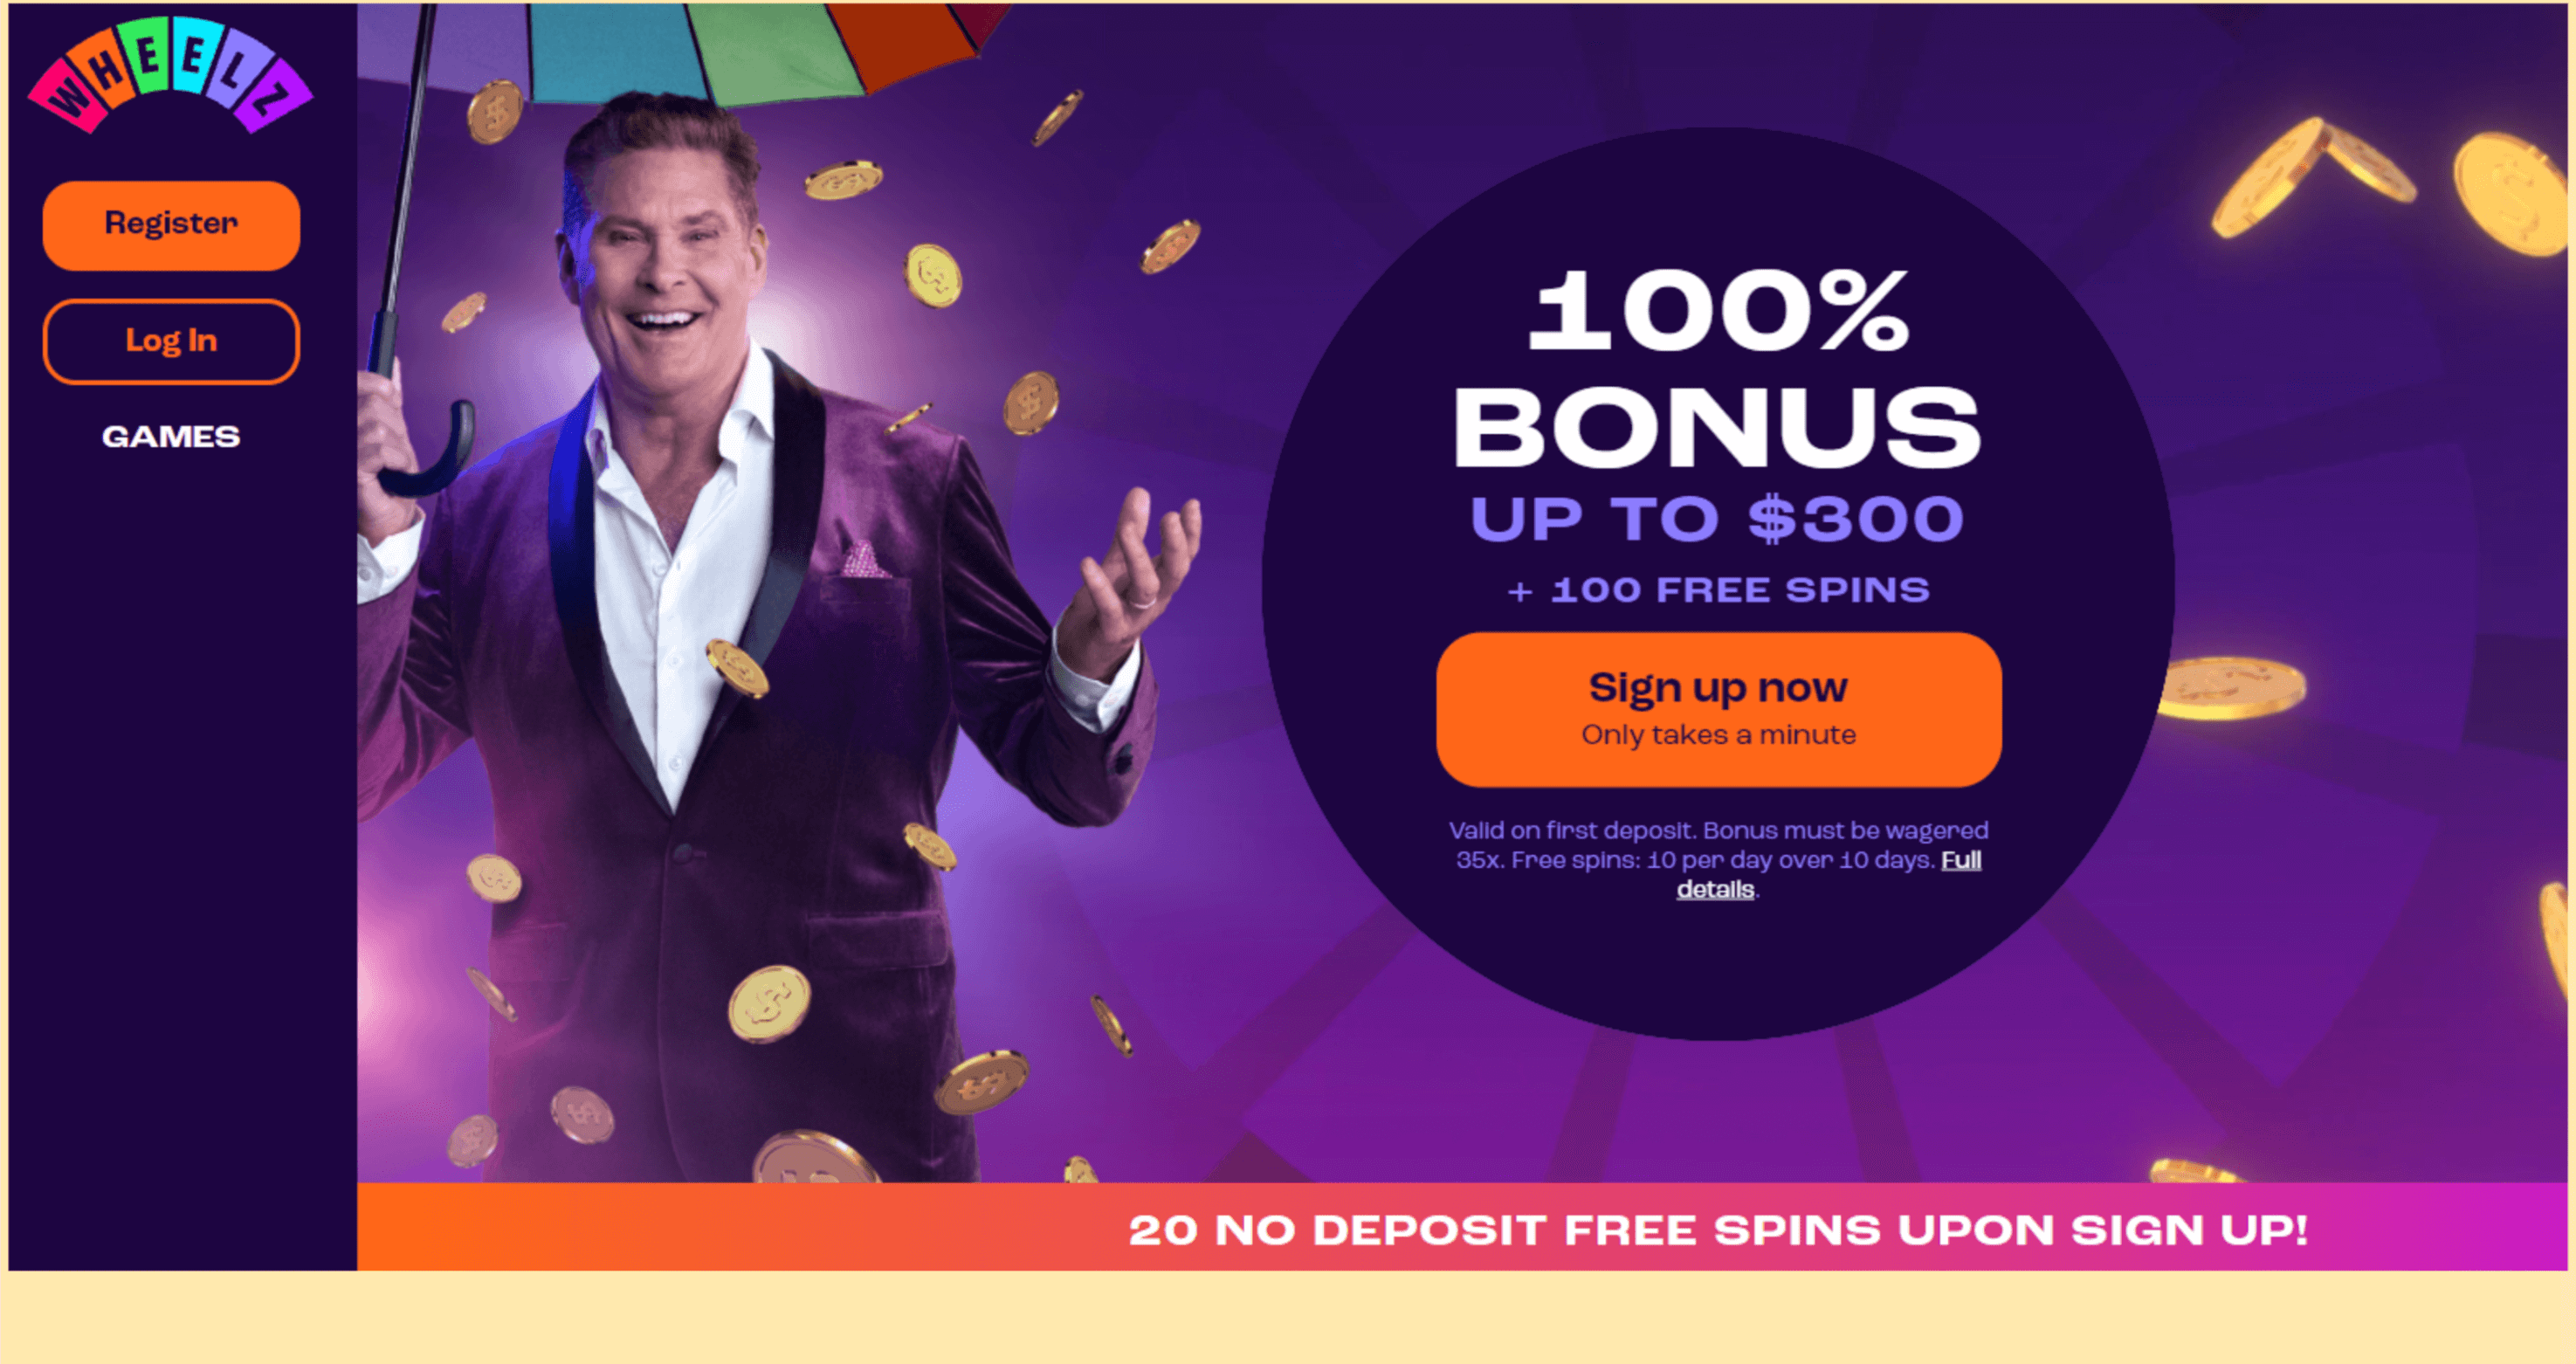 Free Spins Upon Sign Up Offer